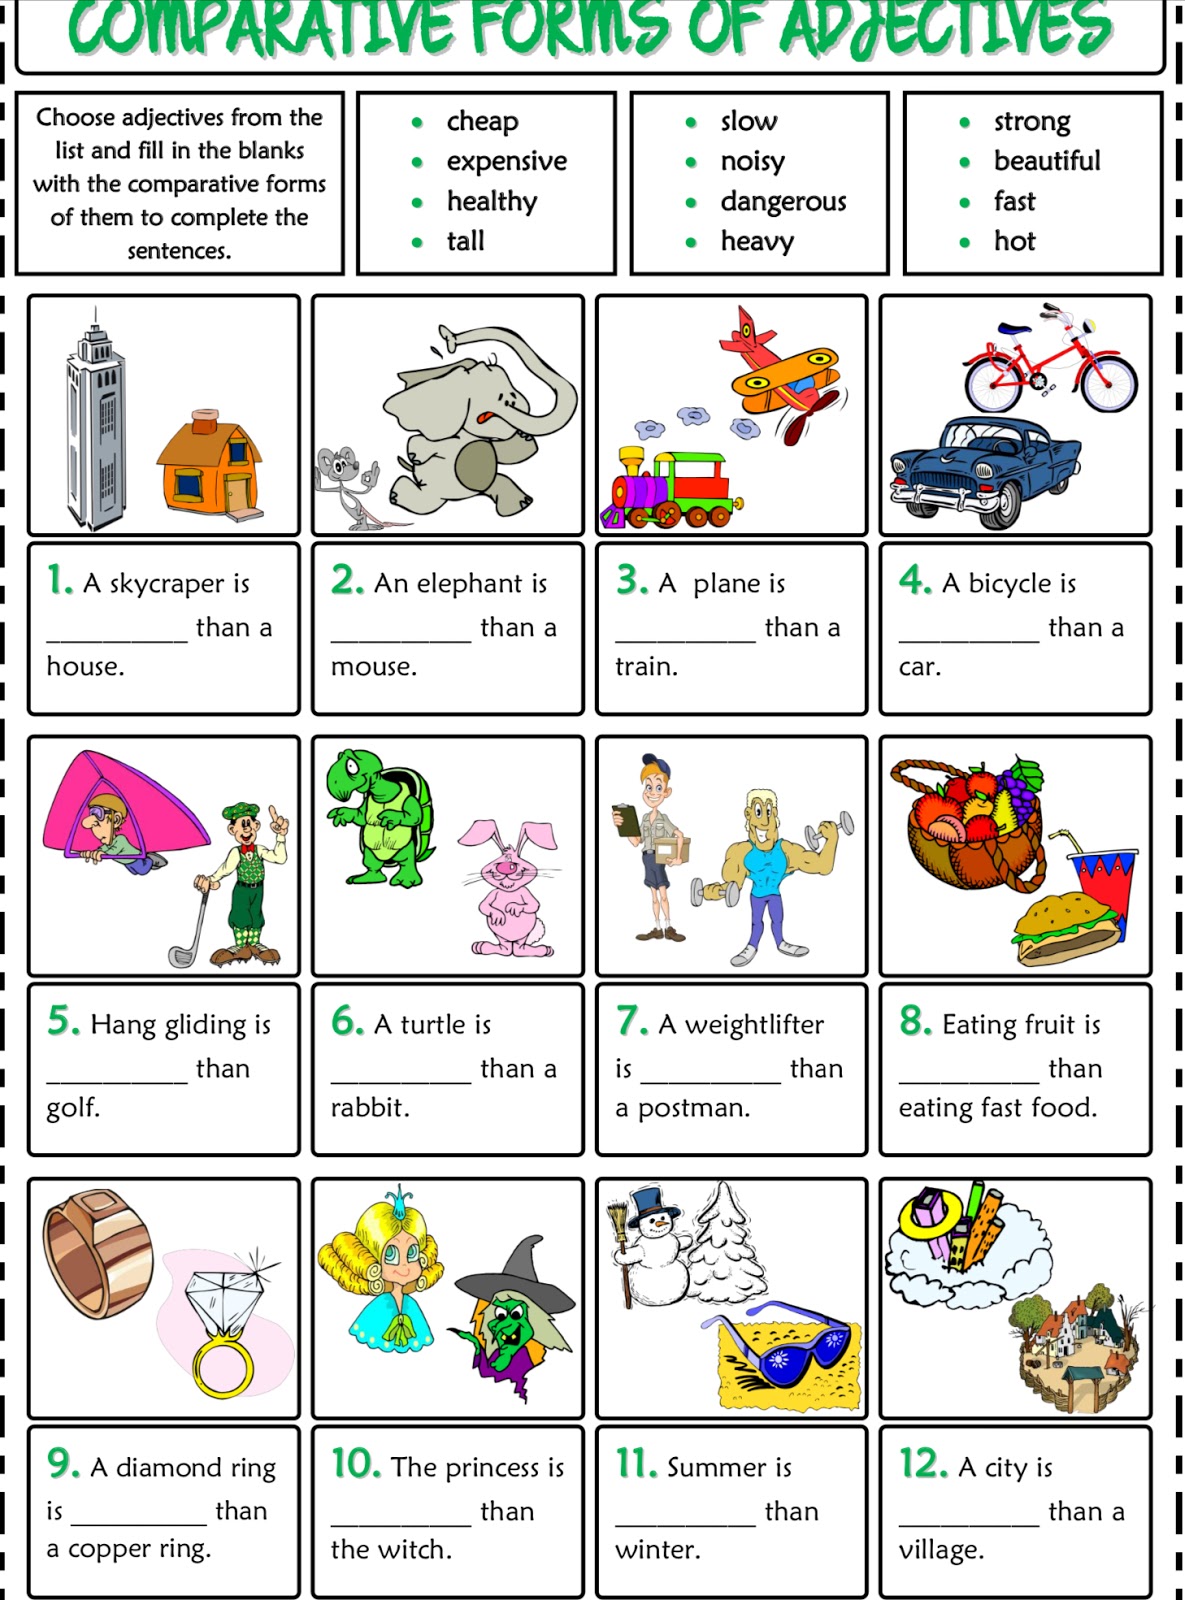 Young comparative form. Comparative form задания. Comparative form of the adjectives. Comparatives Worksheets. Comparative form Kids pdf.